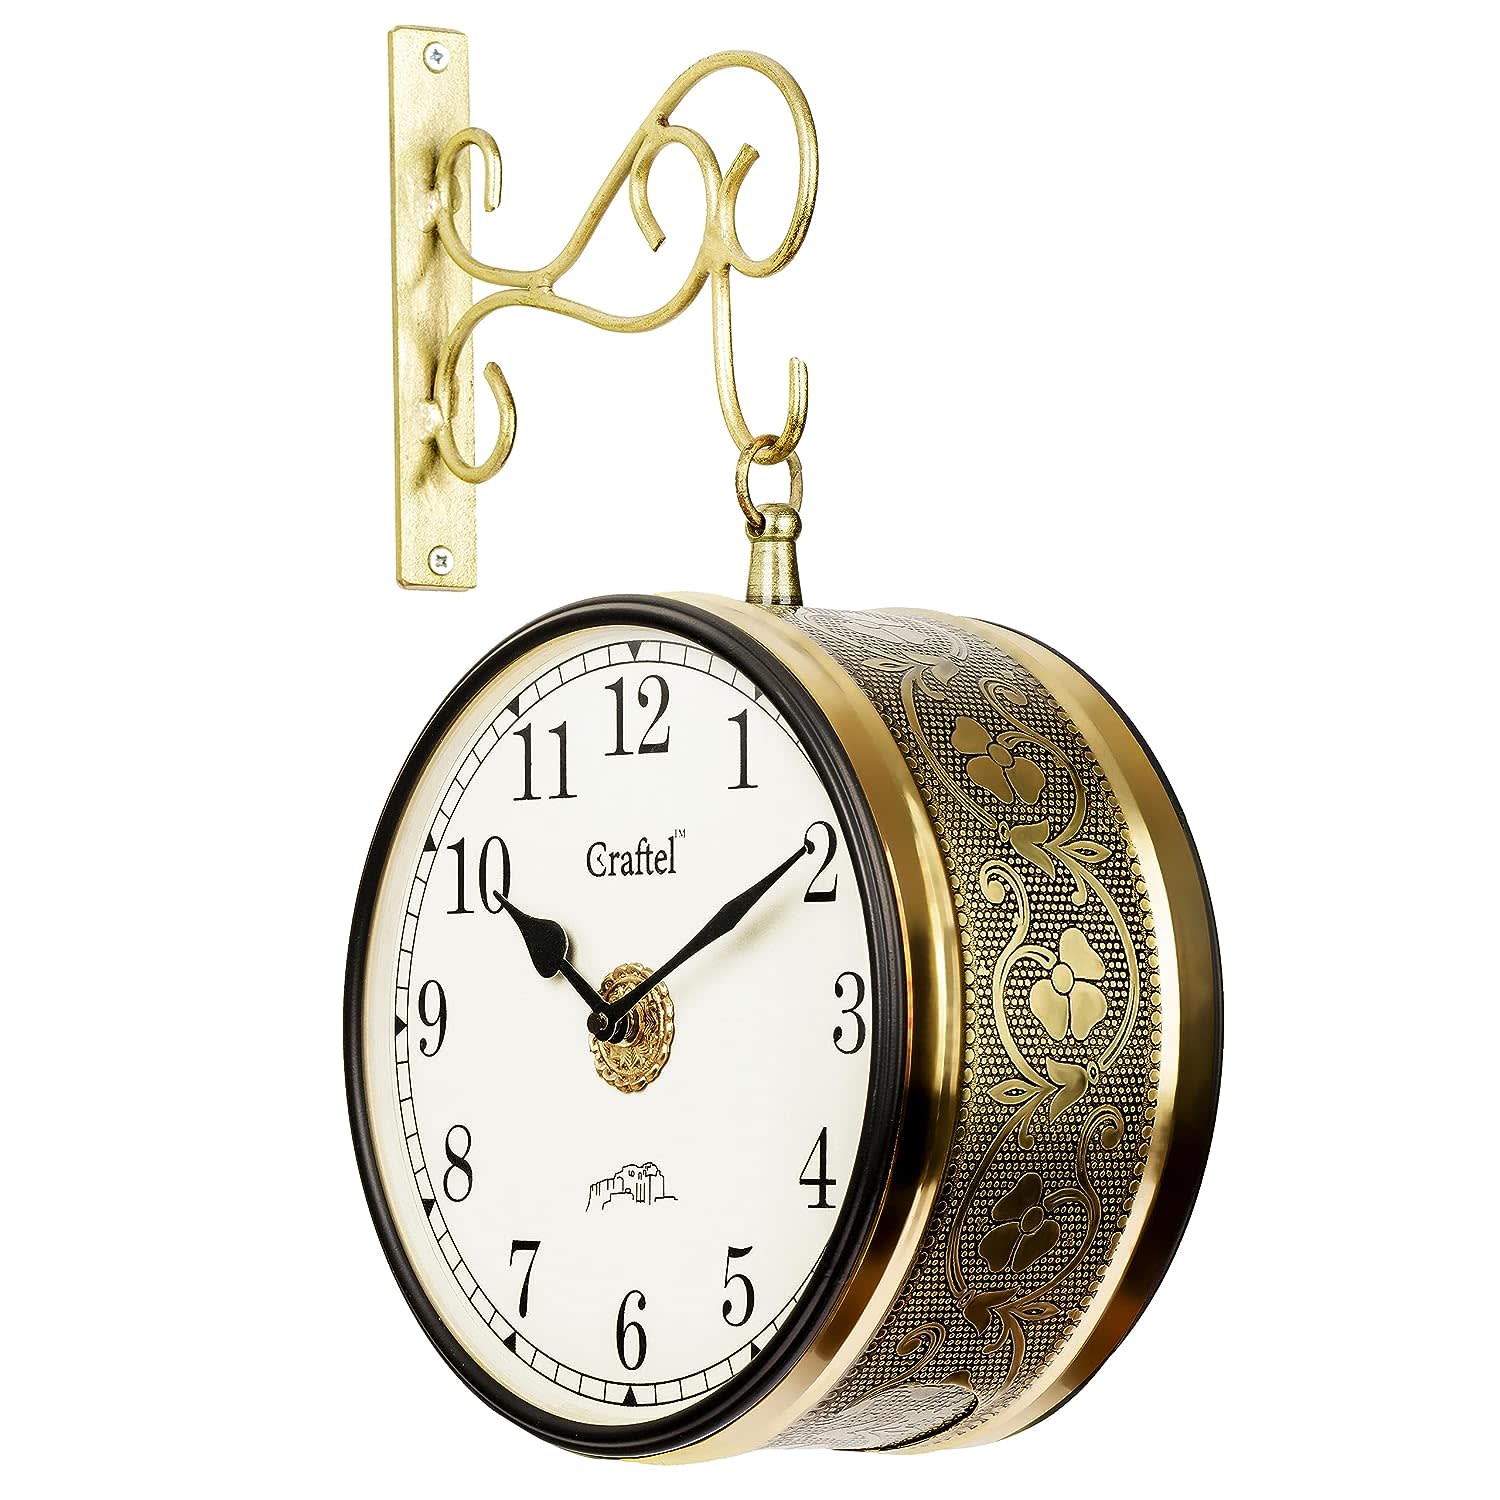 CRAFTEL Metal Analog Double Sided Vintage Station Wall Clock with Brass in dial Shiny Gold 8 Inches